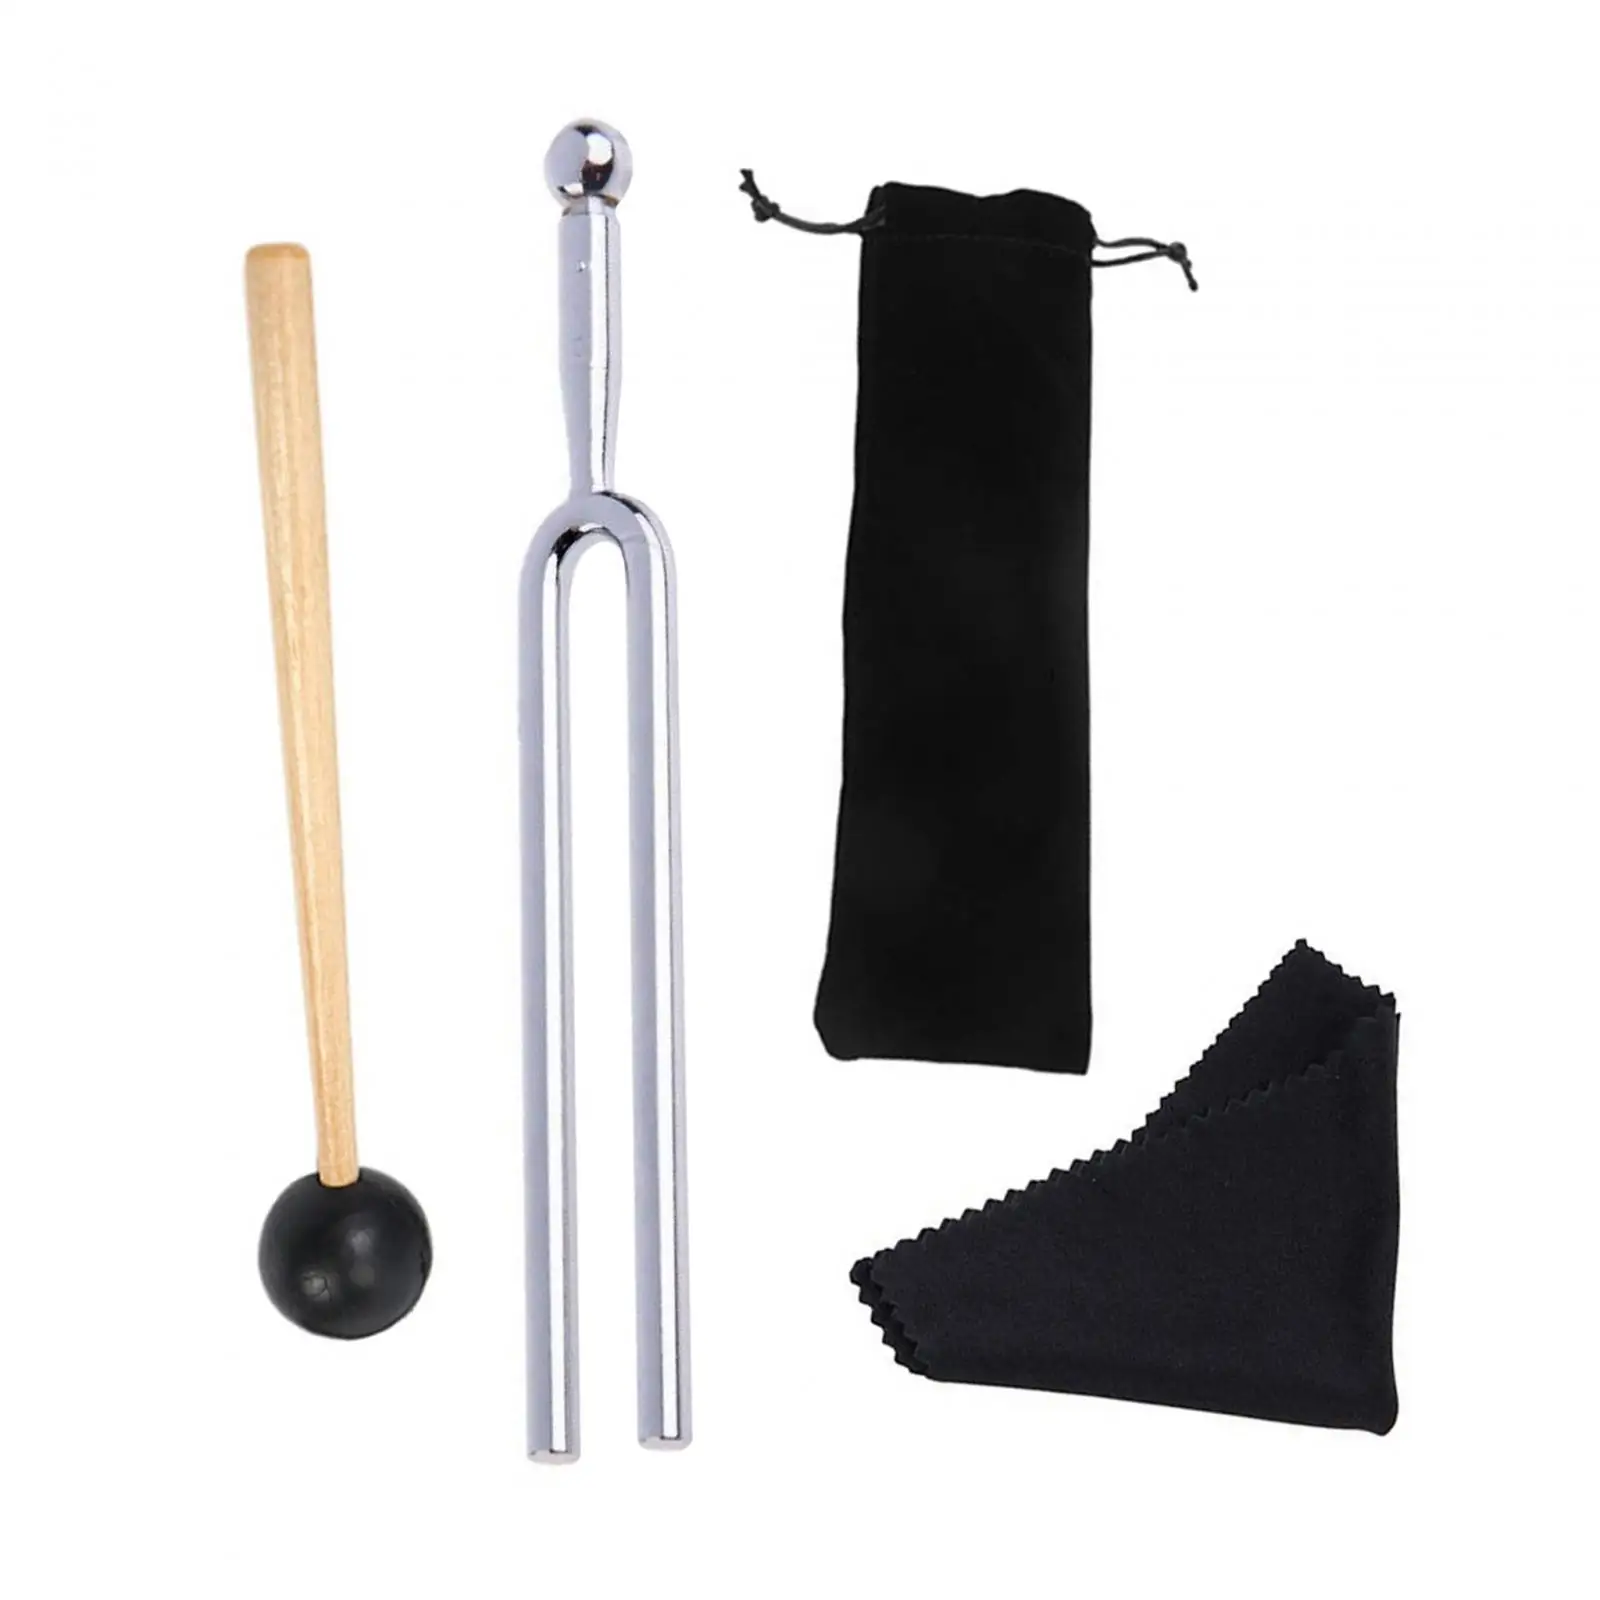 A 440 Tuning Fork Practical Comfortable with Silicone Mallet for Basic Education Singing Practice Ear Trainng Balancing